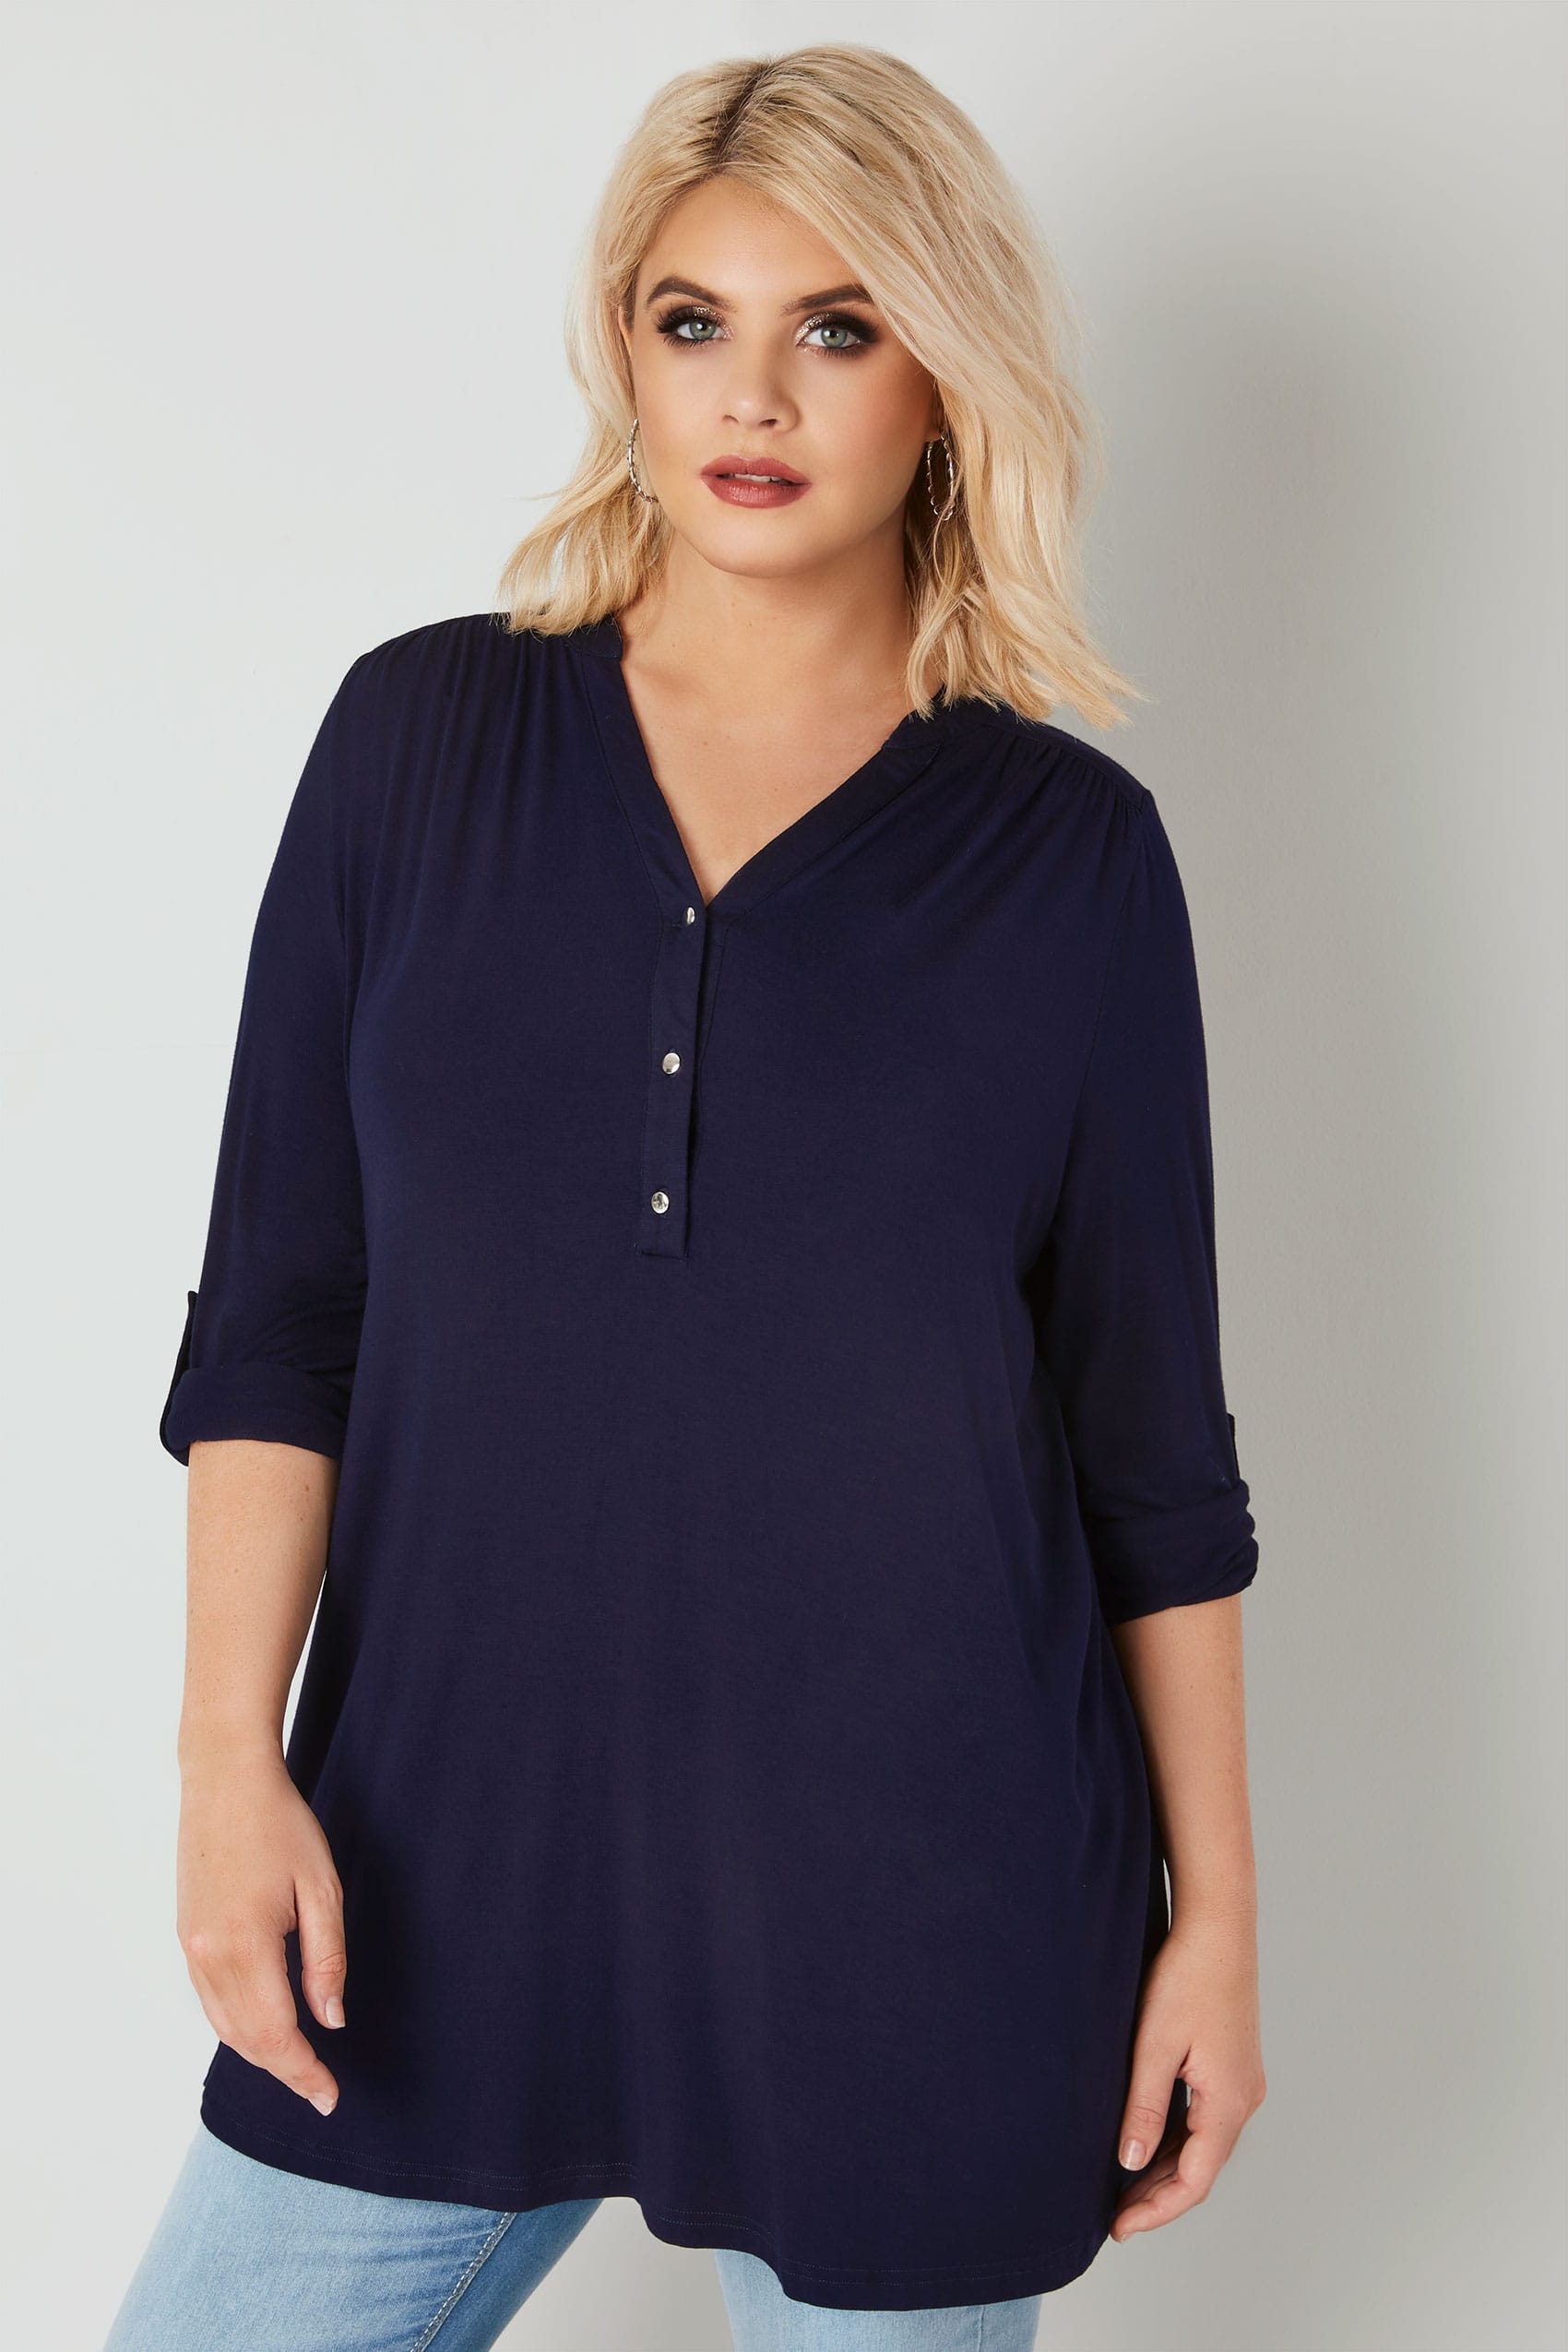 Navy Jersey Shirt With Button Fastenings, Plus size 16 to 36